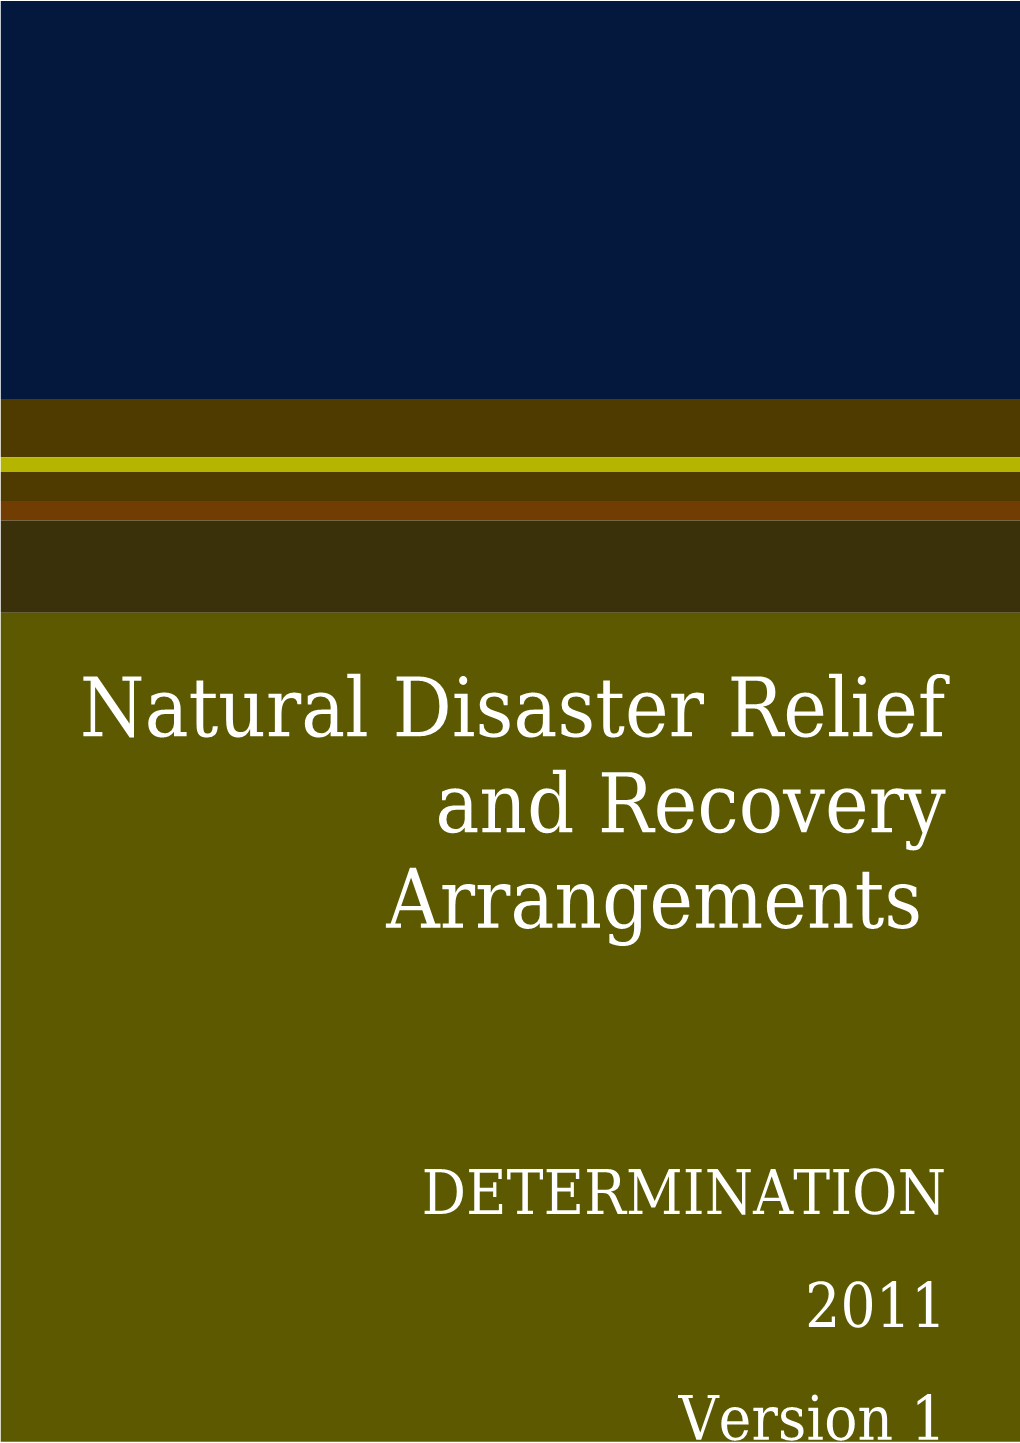 Natural Disaster Relief and Recovery Arrangements - DETERMINATION 2011